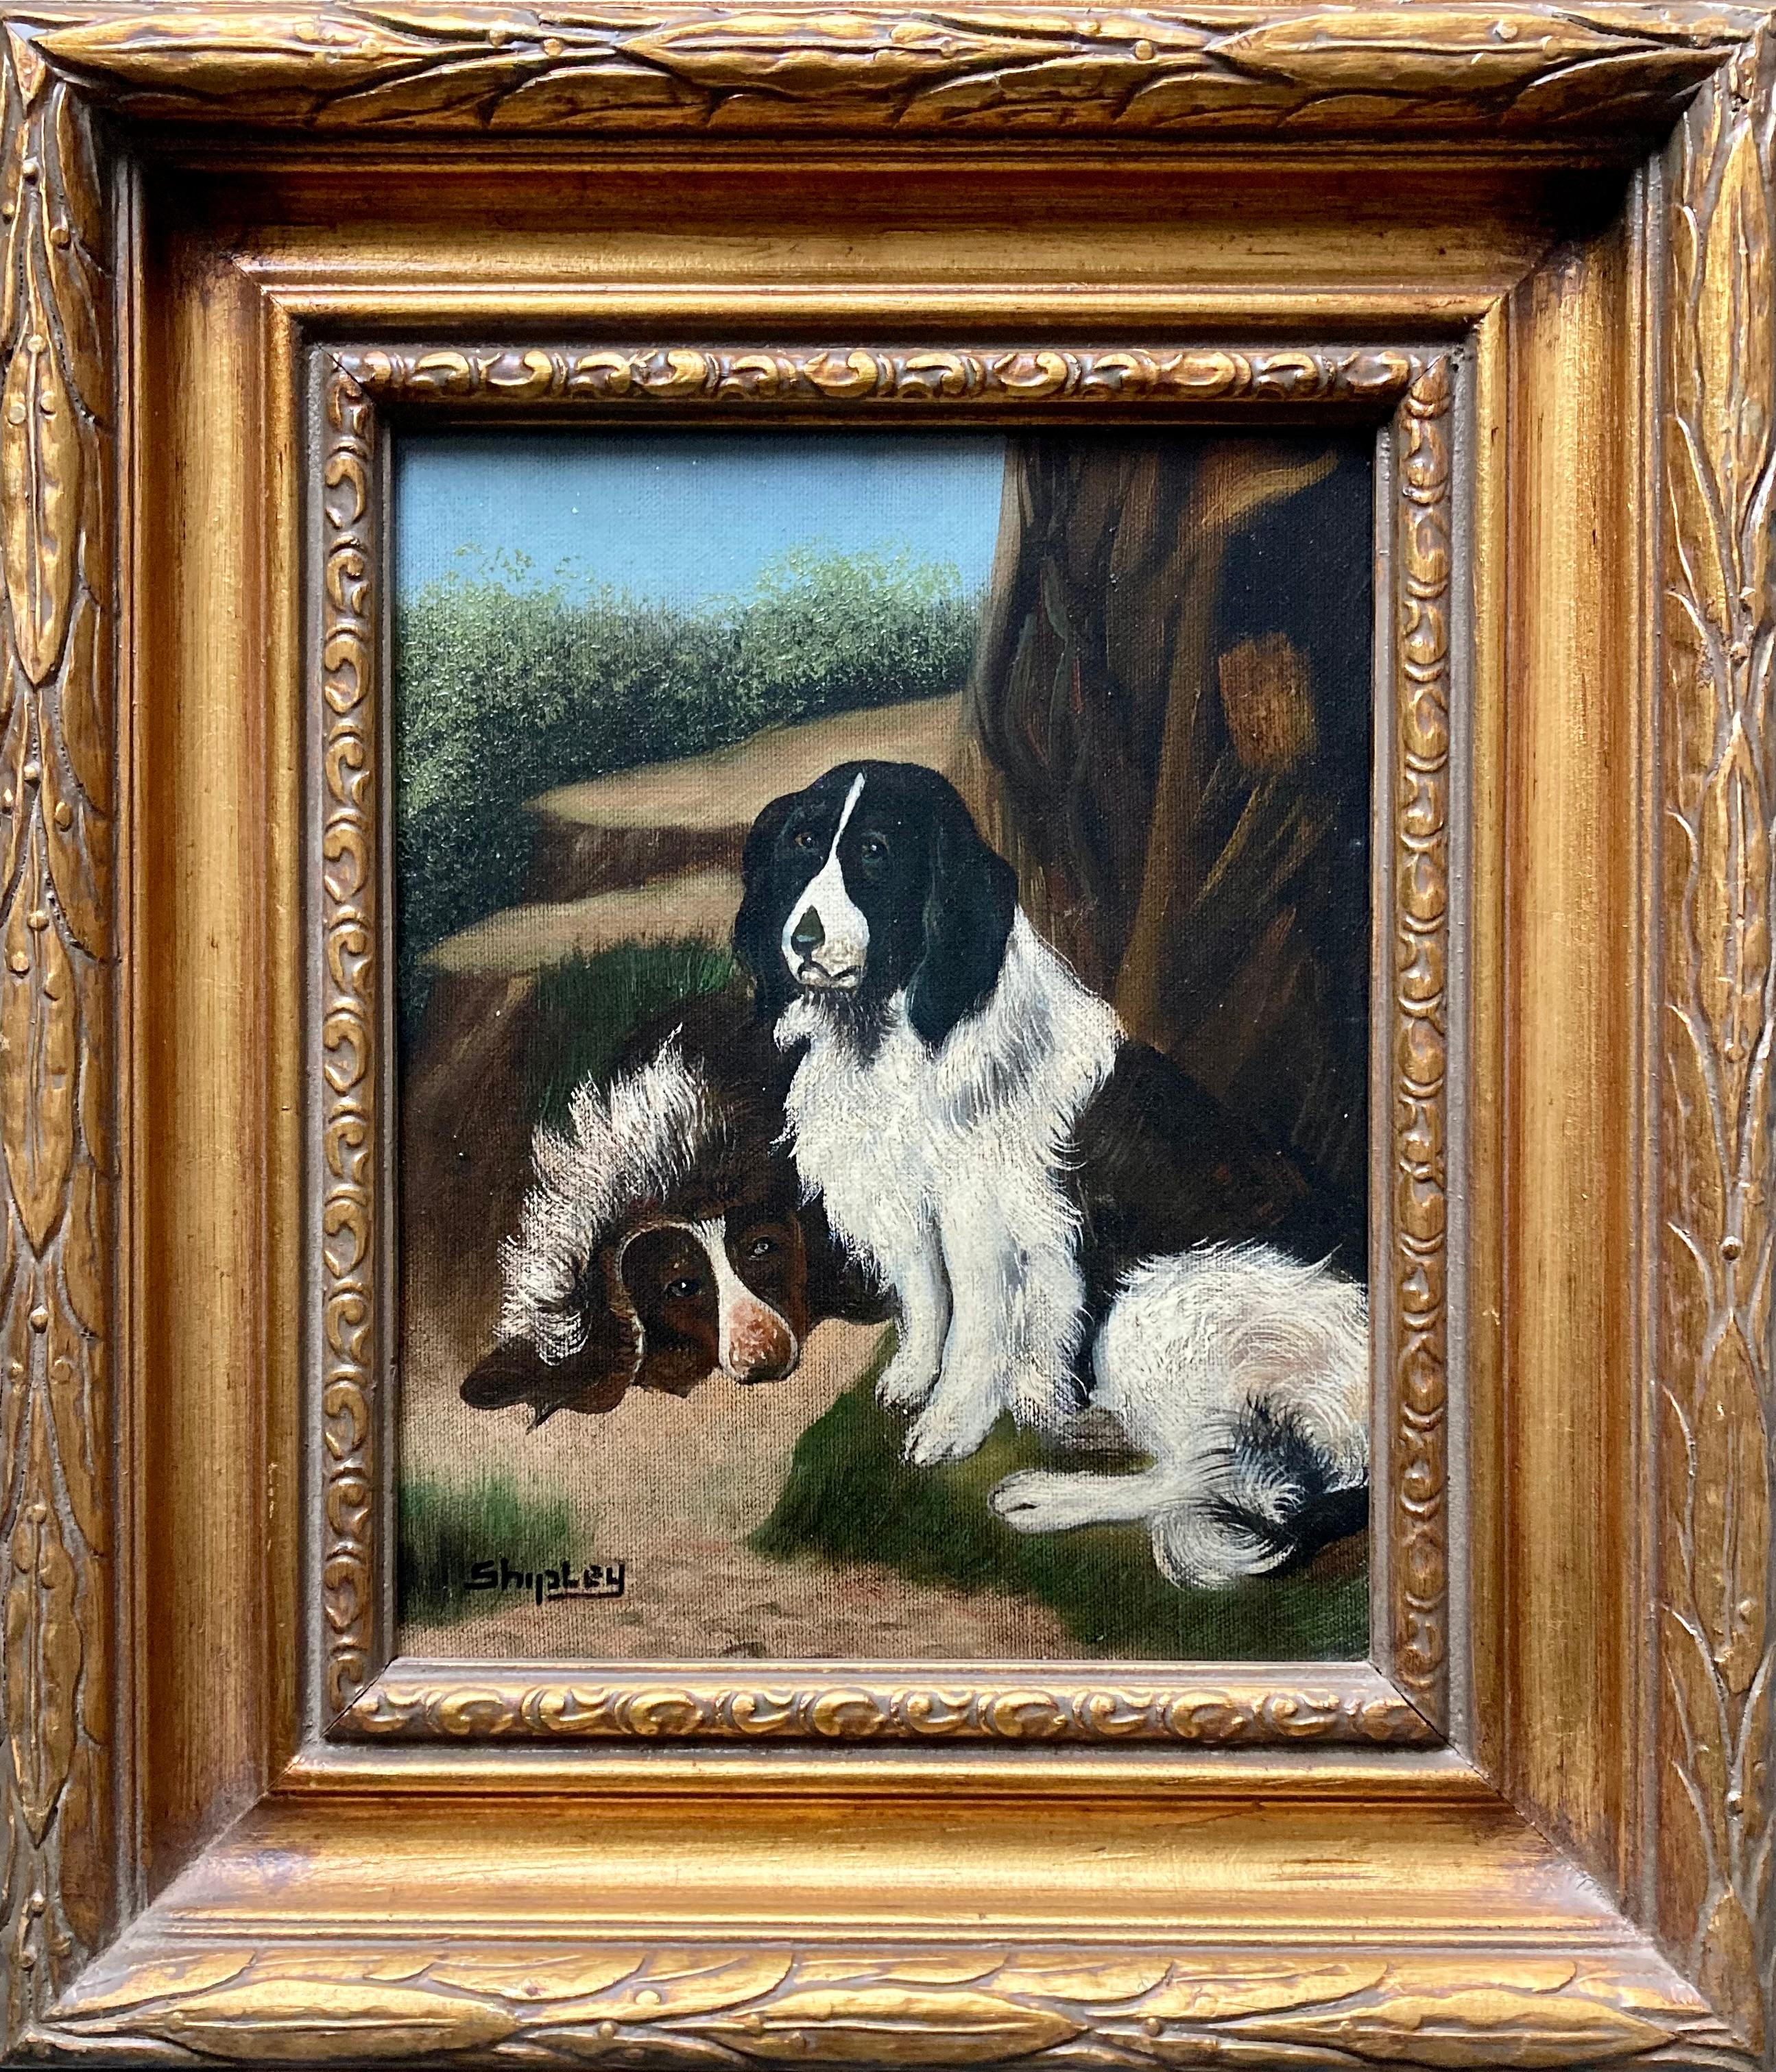 "Dogs in woods" - Painting by Shipley